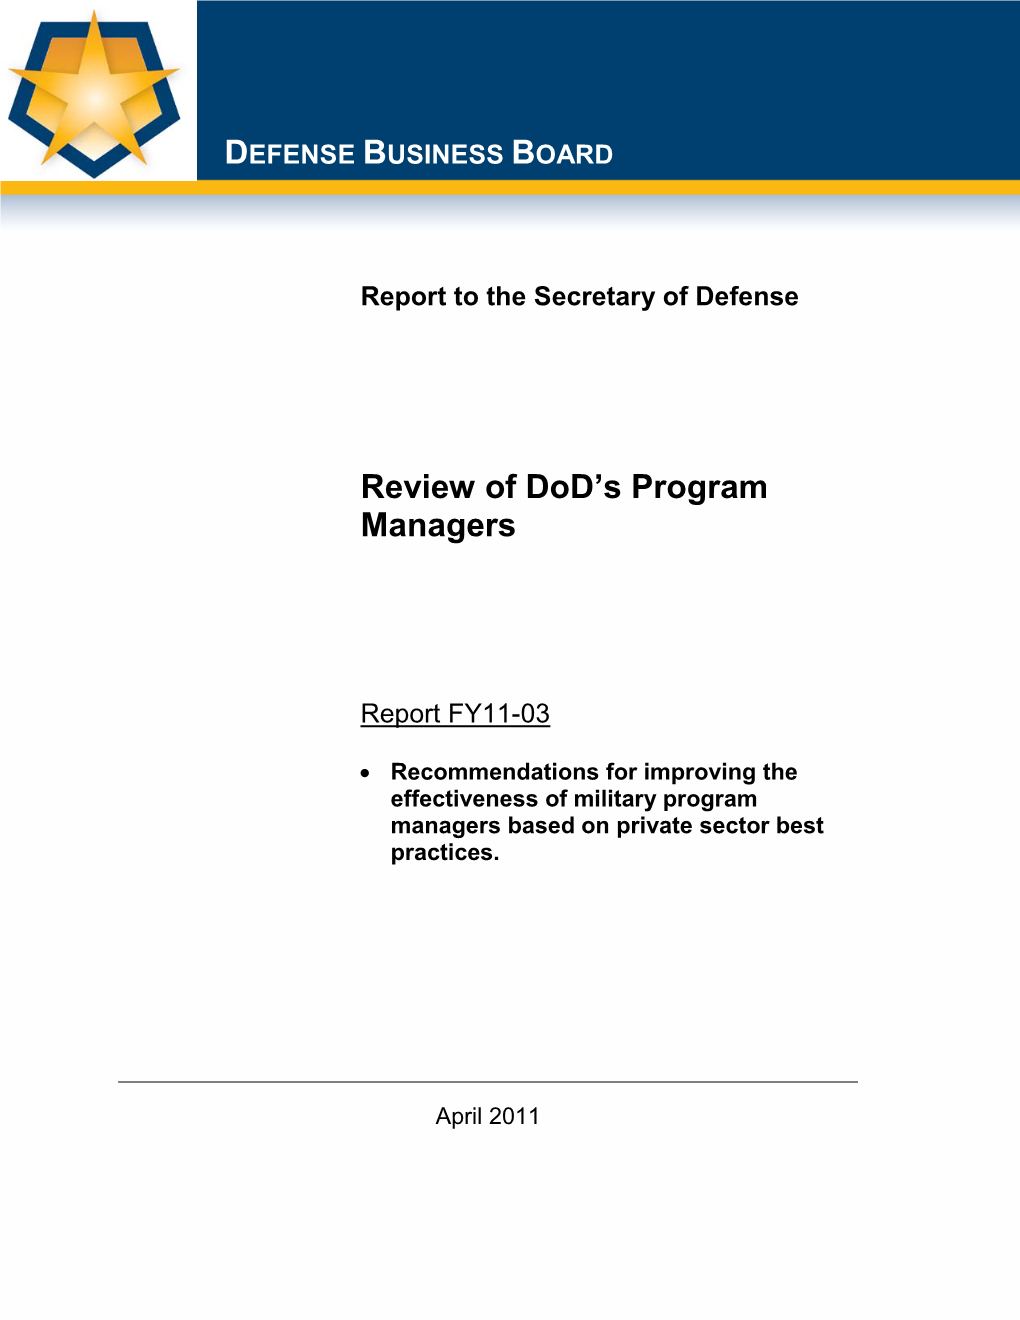 Review of Dod's Program Managers